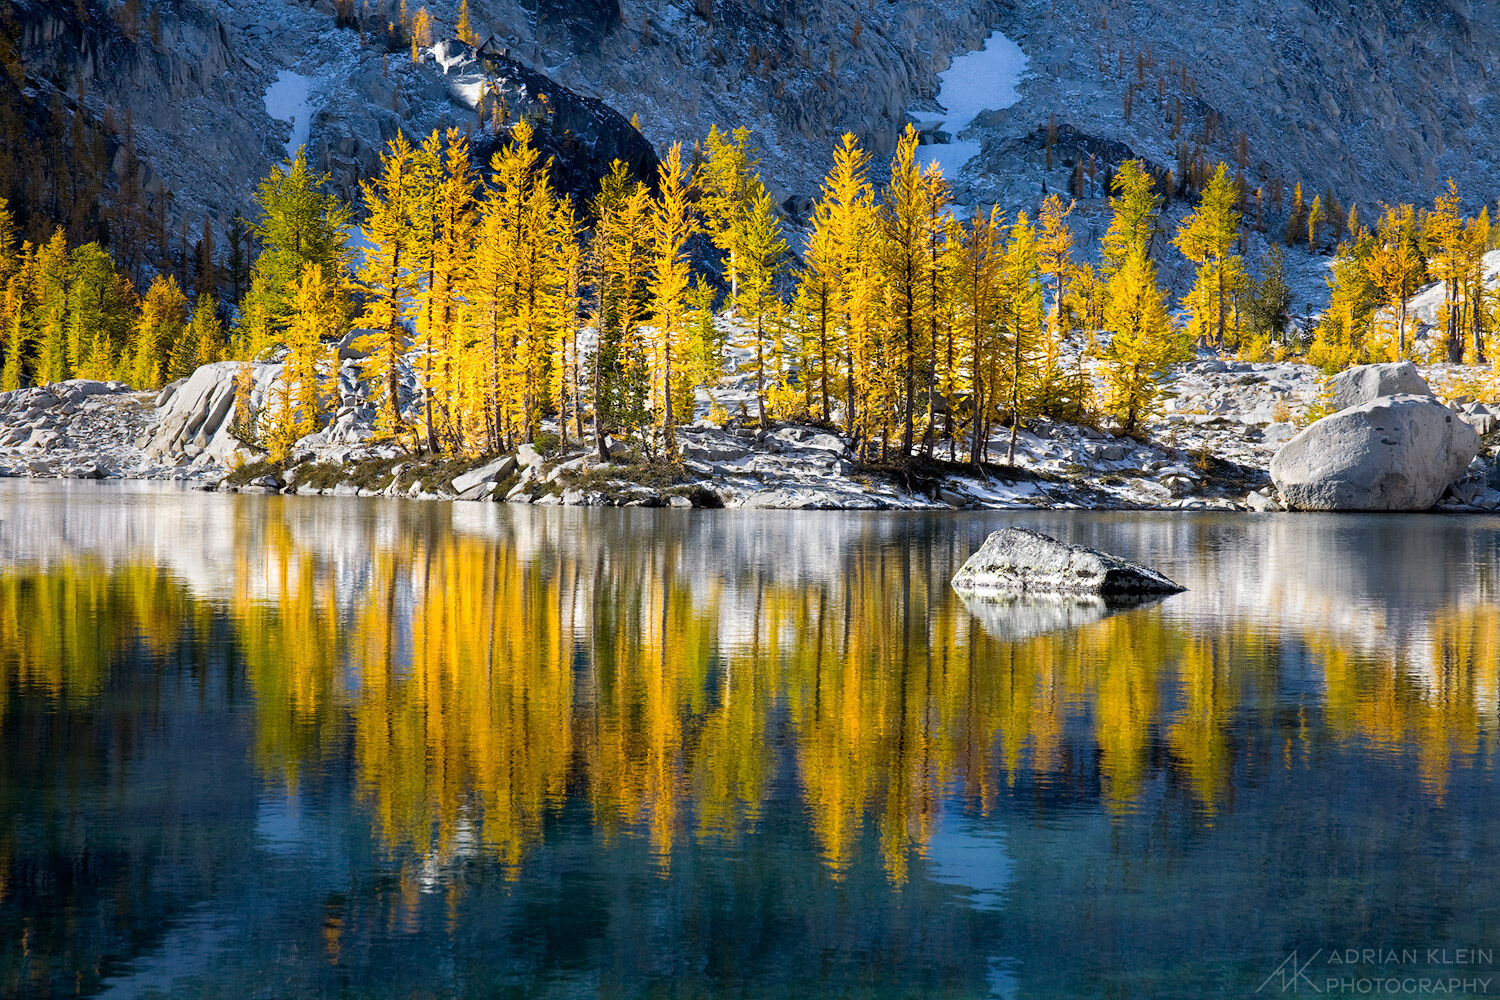 Larches turned gold in fall along the lakes The Enchantments in Alpine Lakes Wilderness, Washington. Limited Edition of 100.